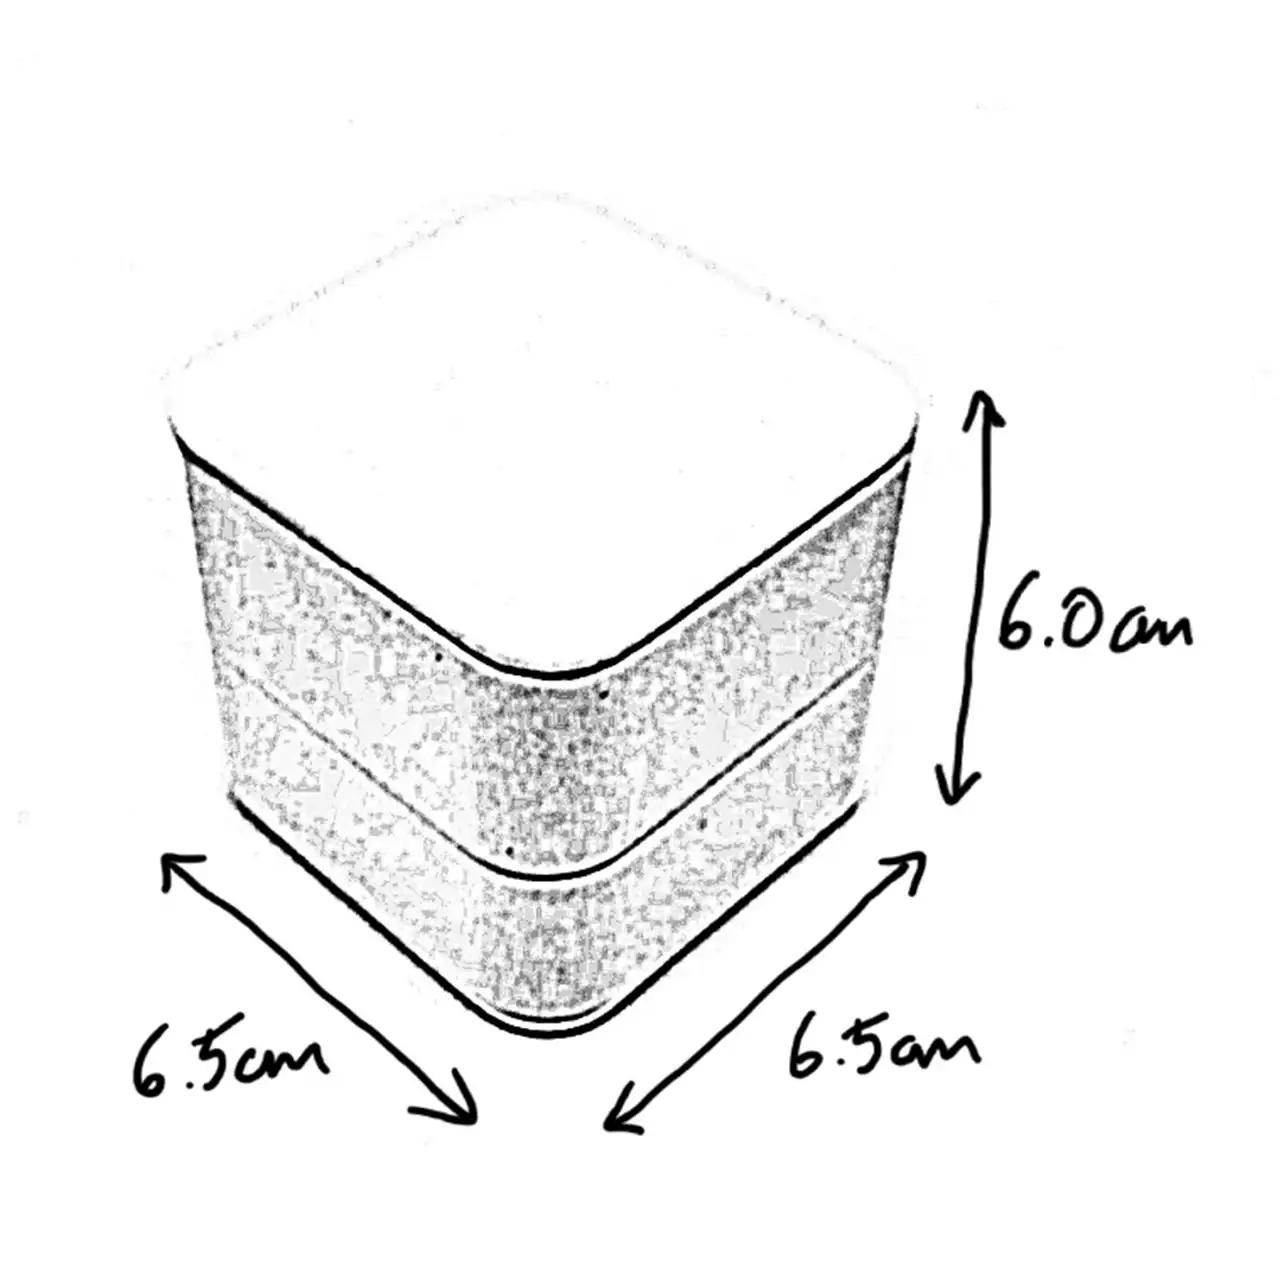 whitney ring box dimensions